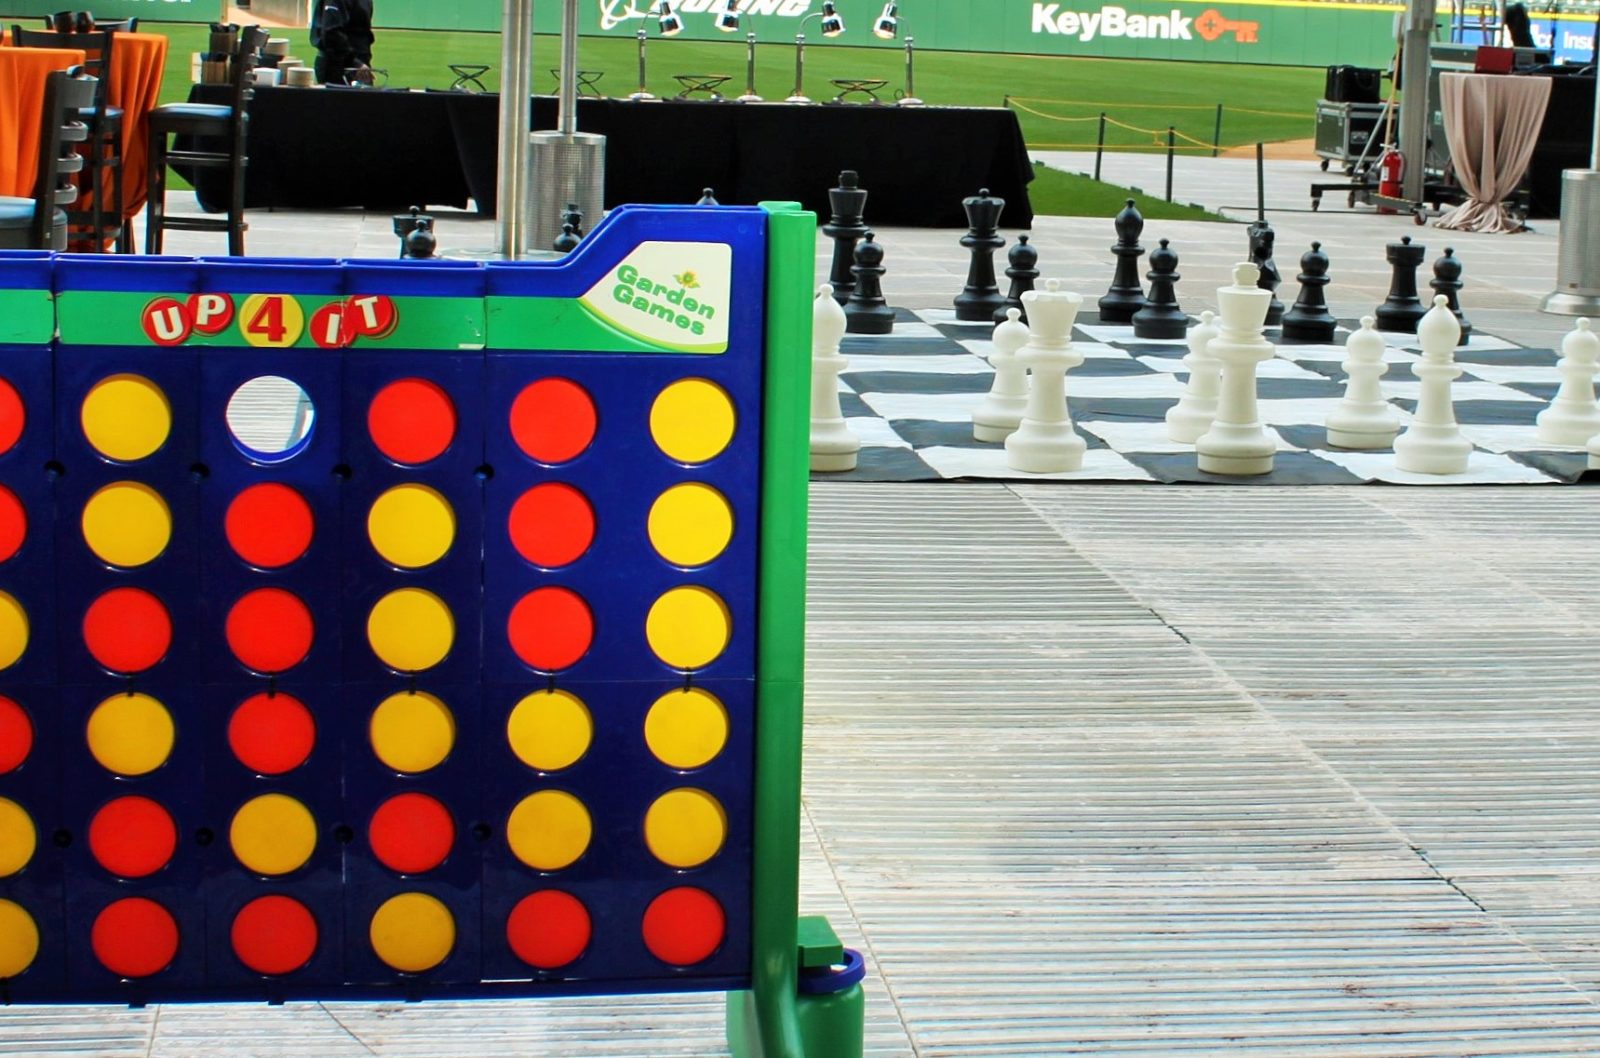 Giant Connect Four and Giant Chess lawn game rental